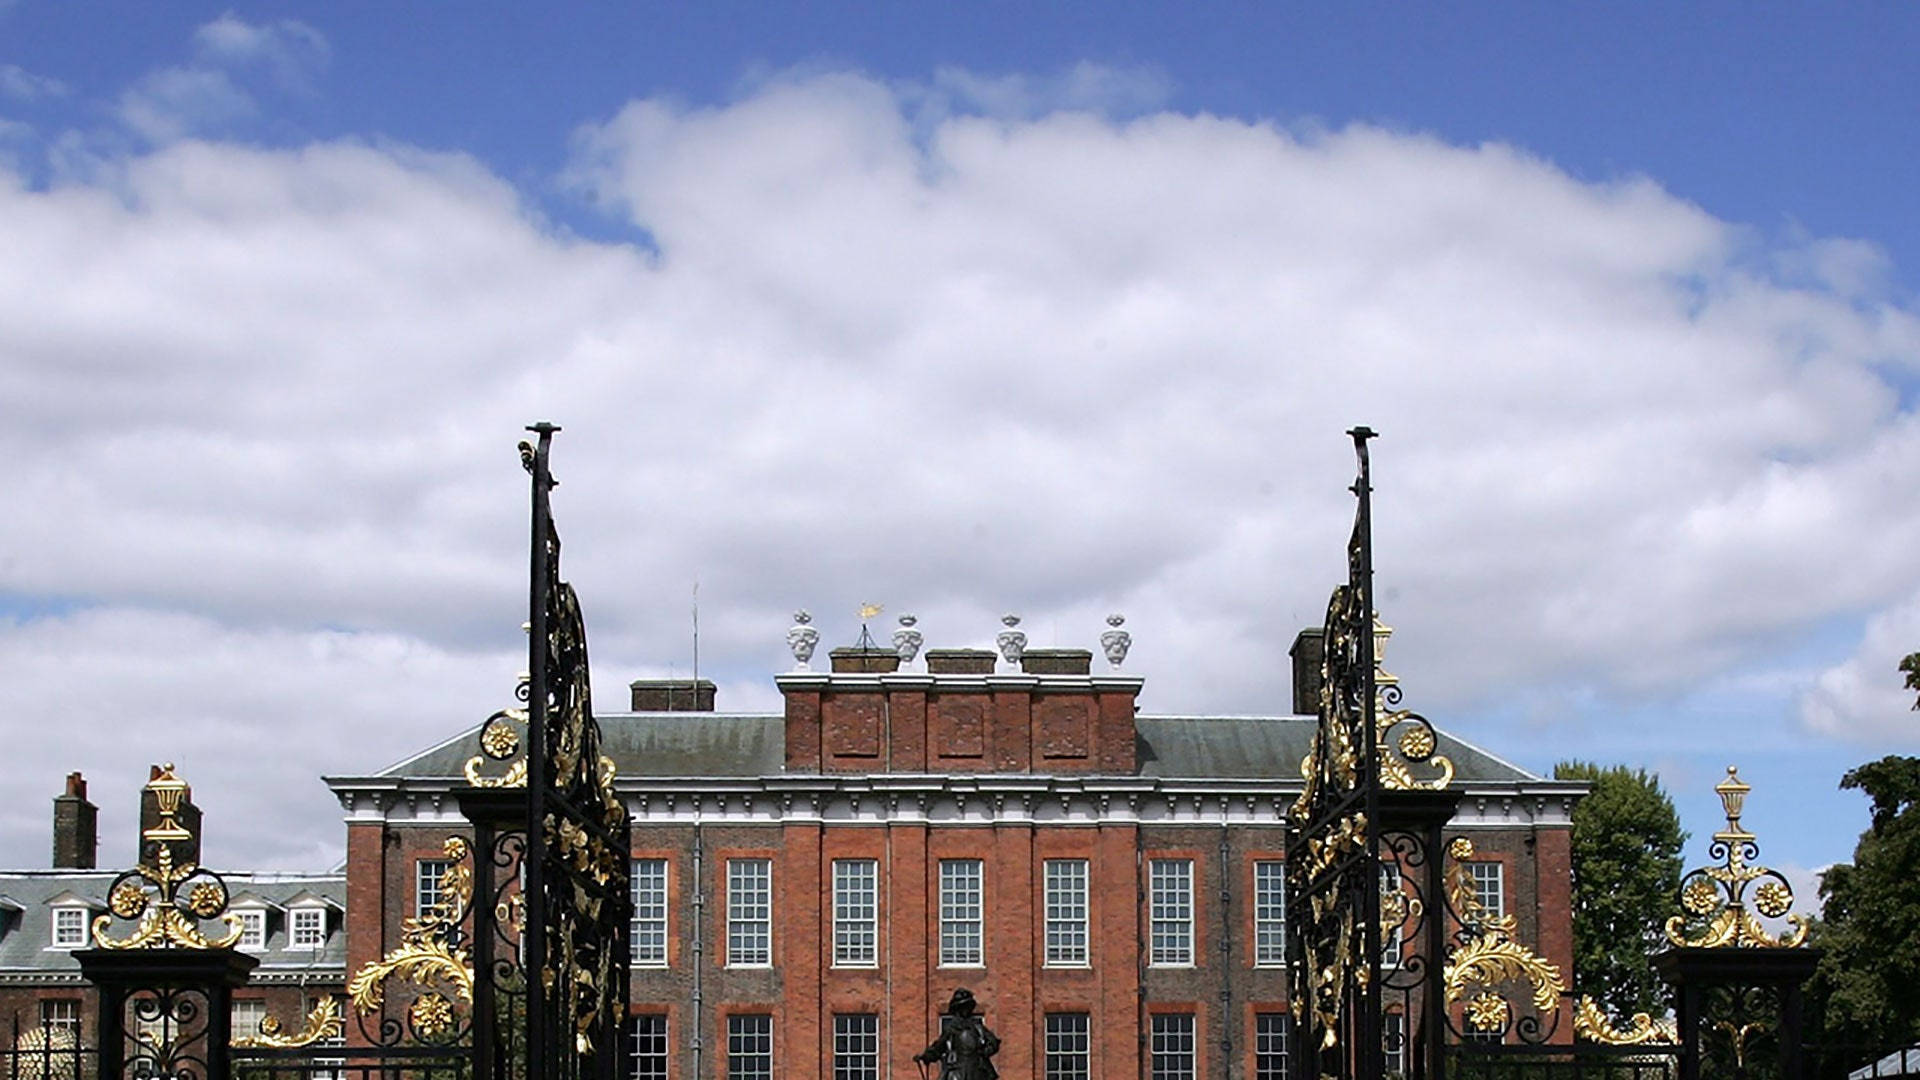 Kensington Palace And Cloudy Sky Picture